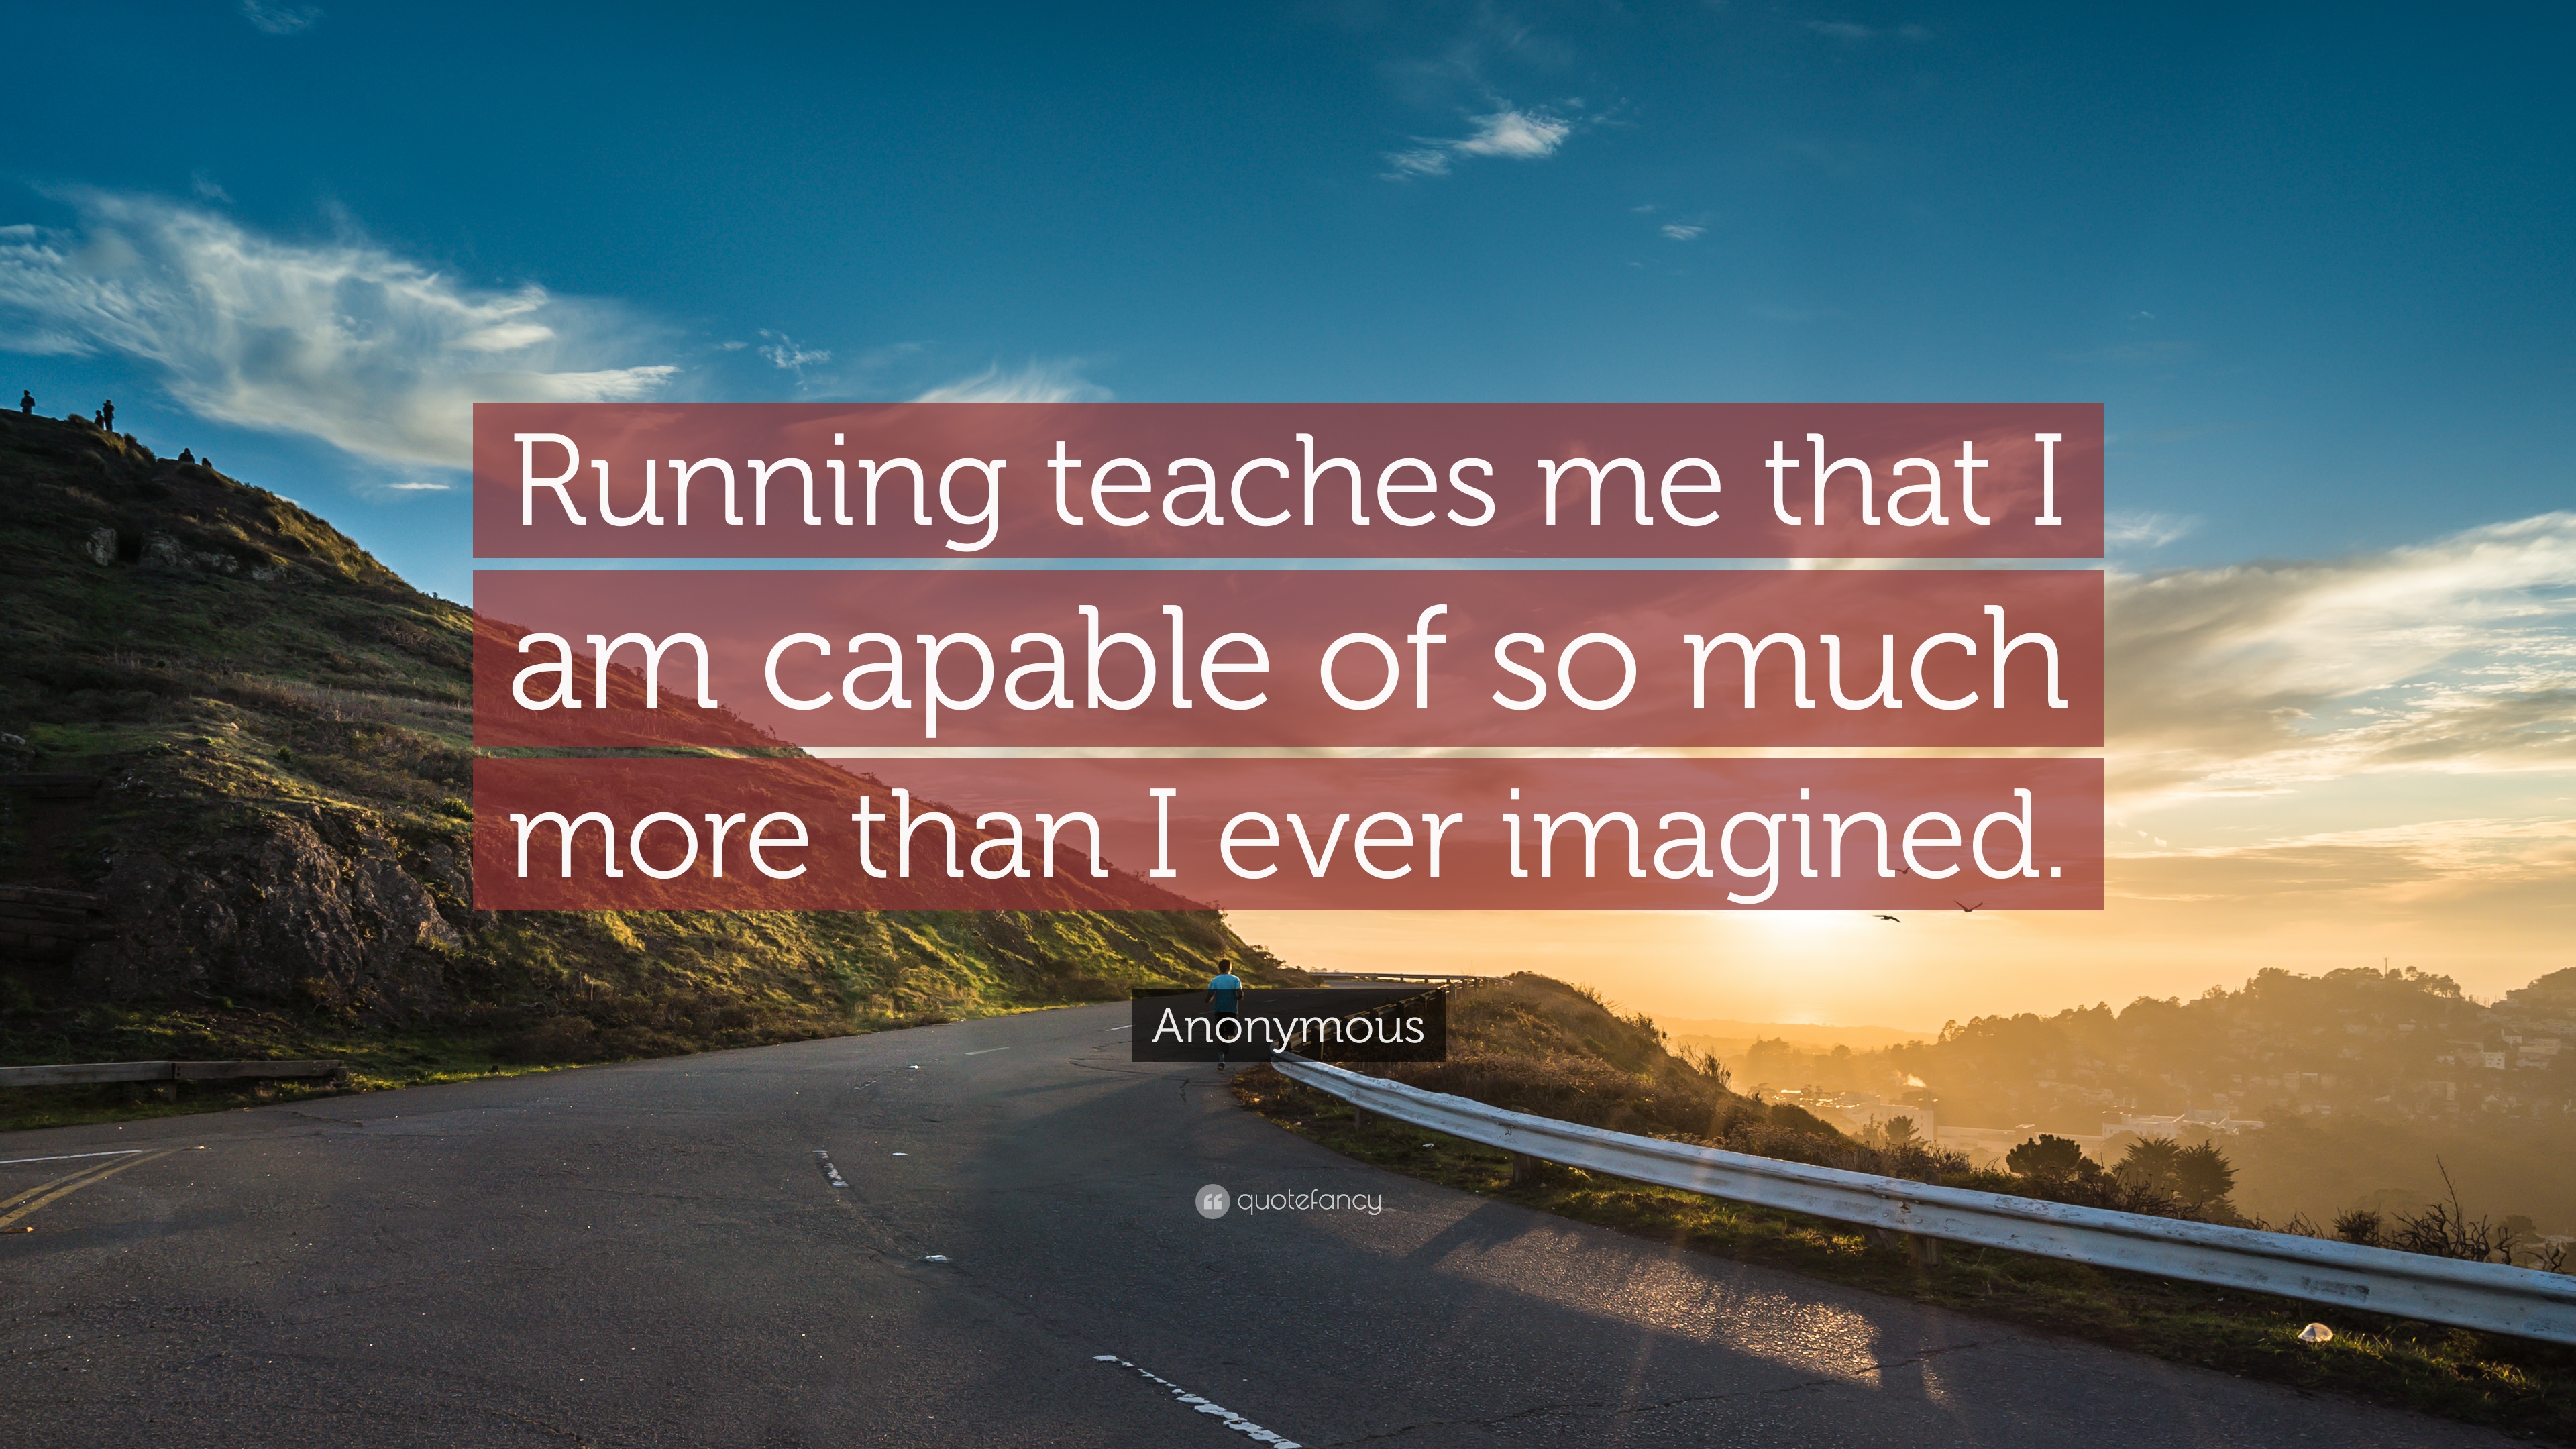 Running teaches me that I am capable